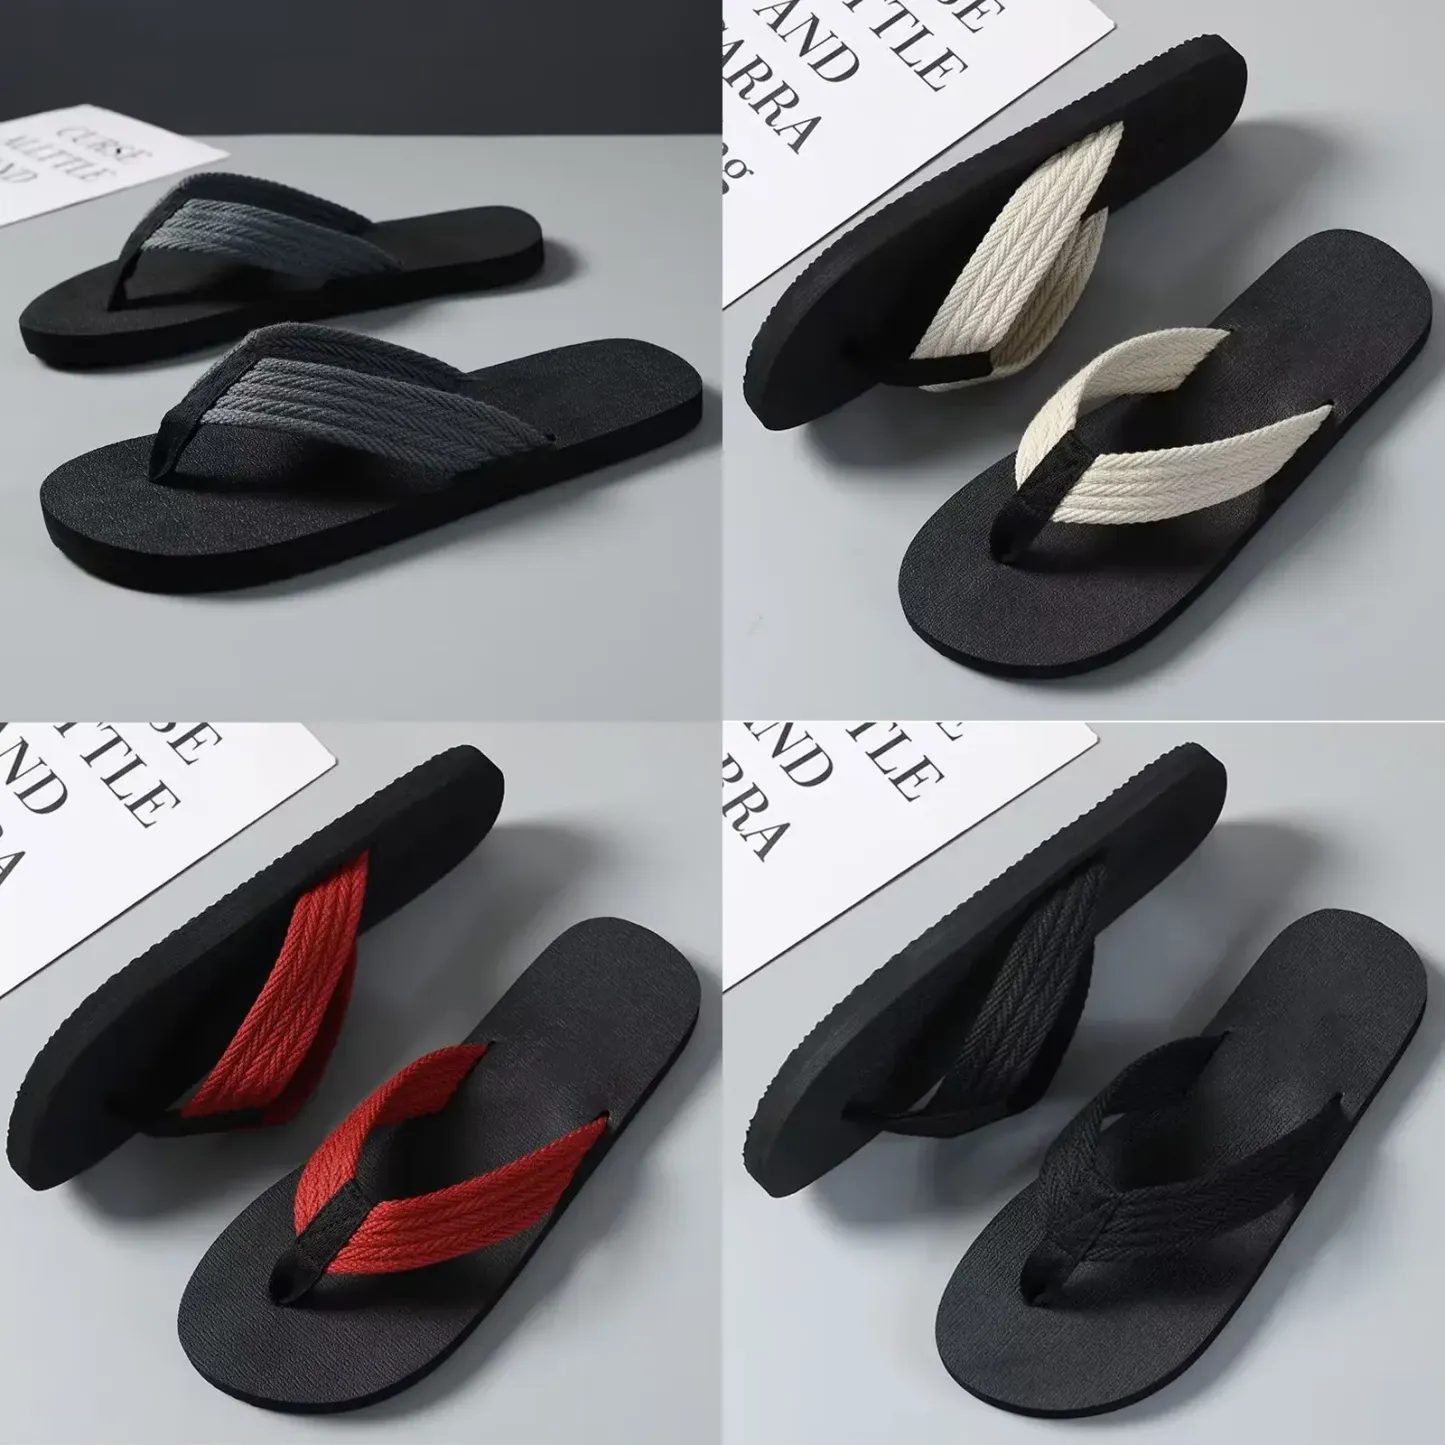 🔥Last Day Promotion 50% OFF🔥 - Hidden Penis Flops（Buy 2 Free Shipping）